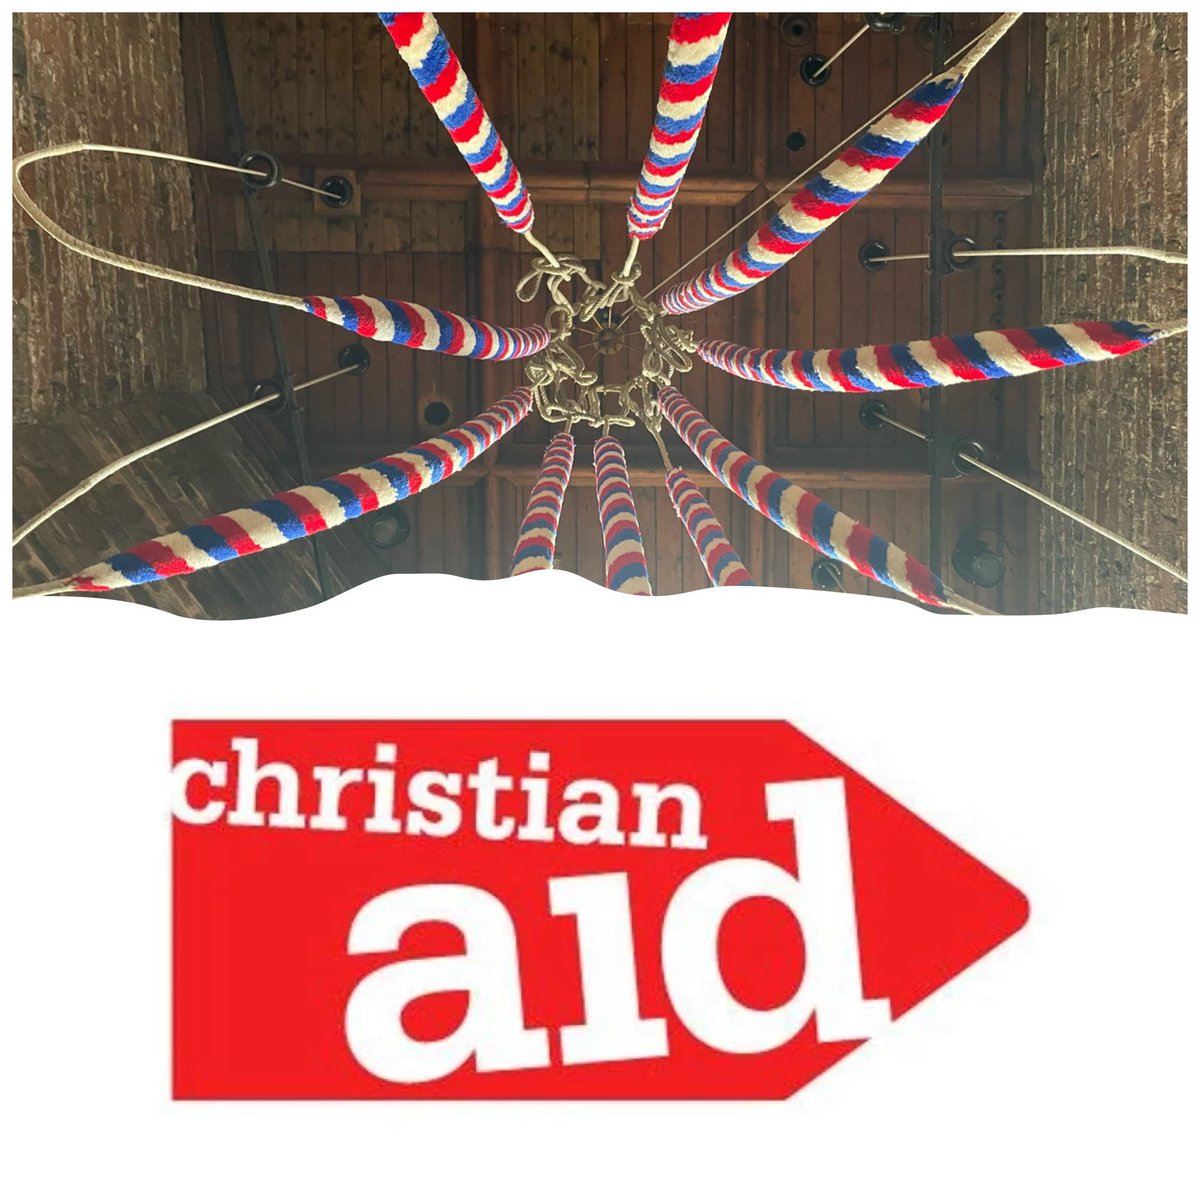 On Sunday at 10am, we will be celebrating the ministry of our Bell Ringers as well as thinking about the work of Christian Aid. Our youth group y@smaa will be selling bacon sandwiches for Christian Aid (and a vegetarian option) after the service. Please bring in cash!